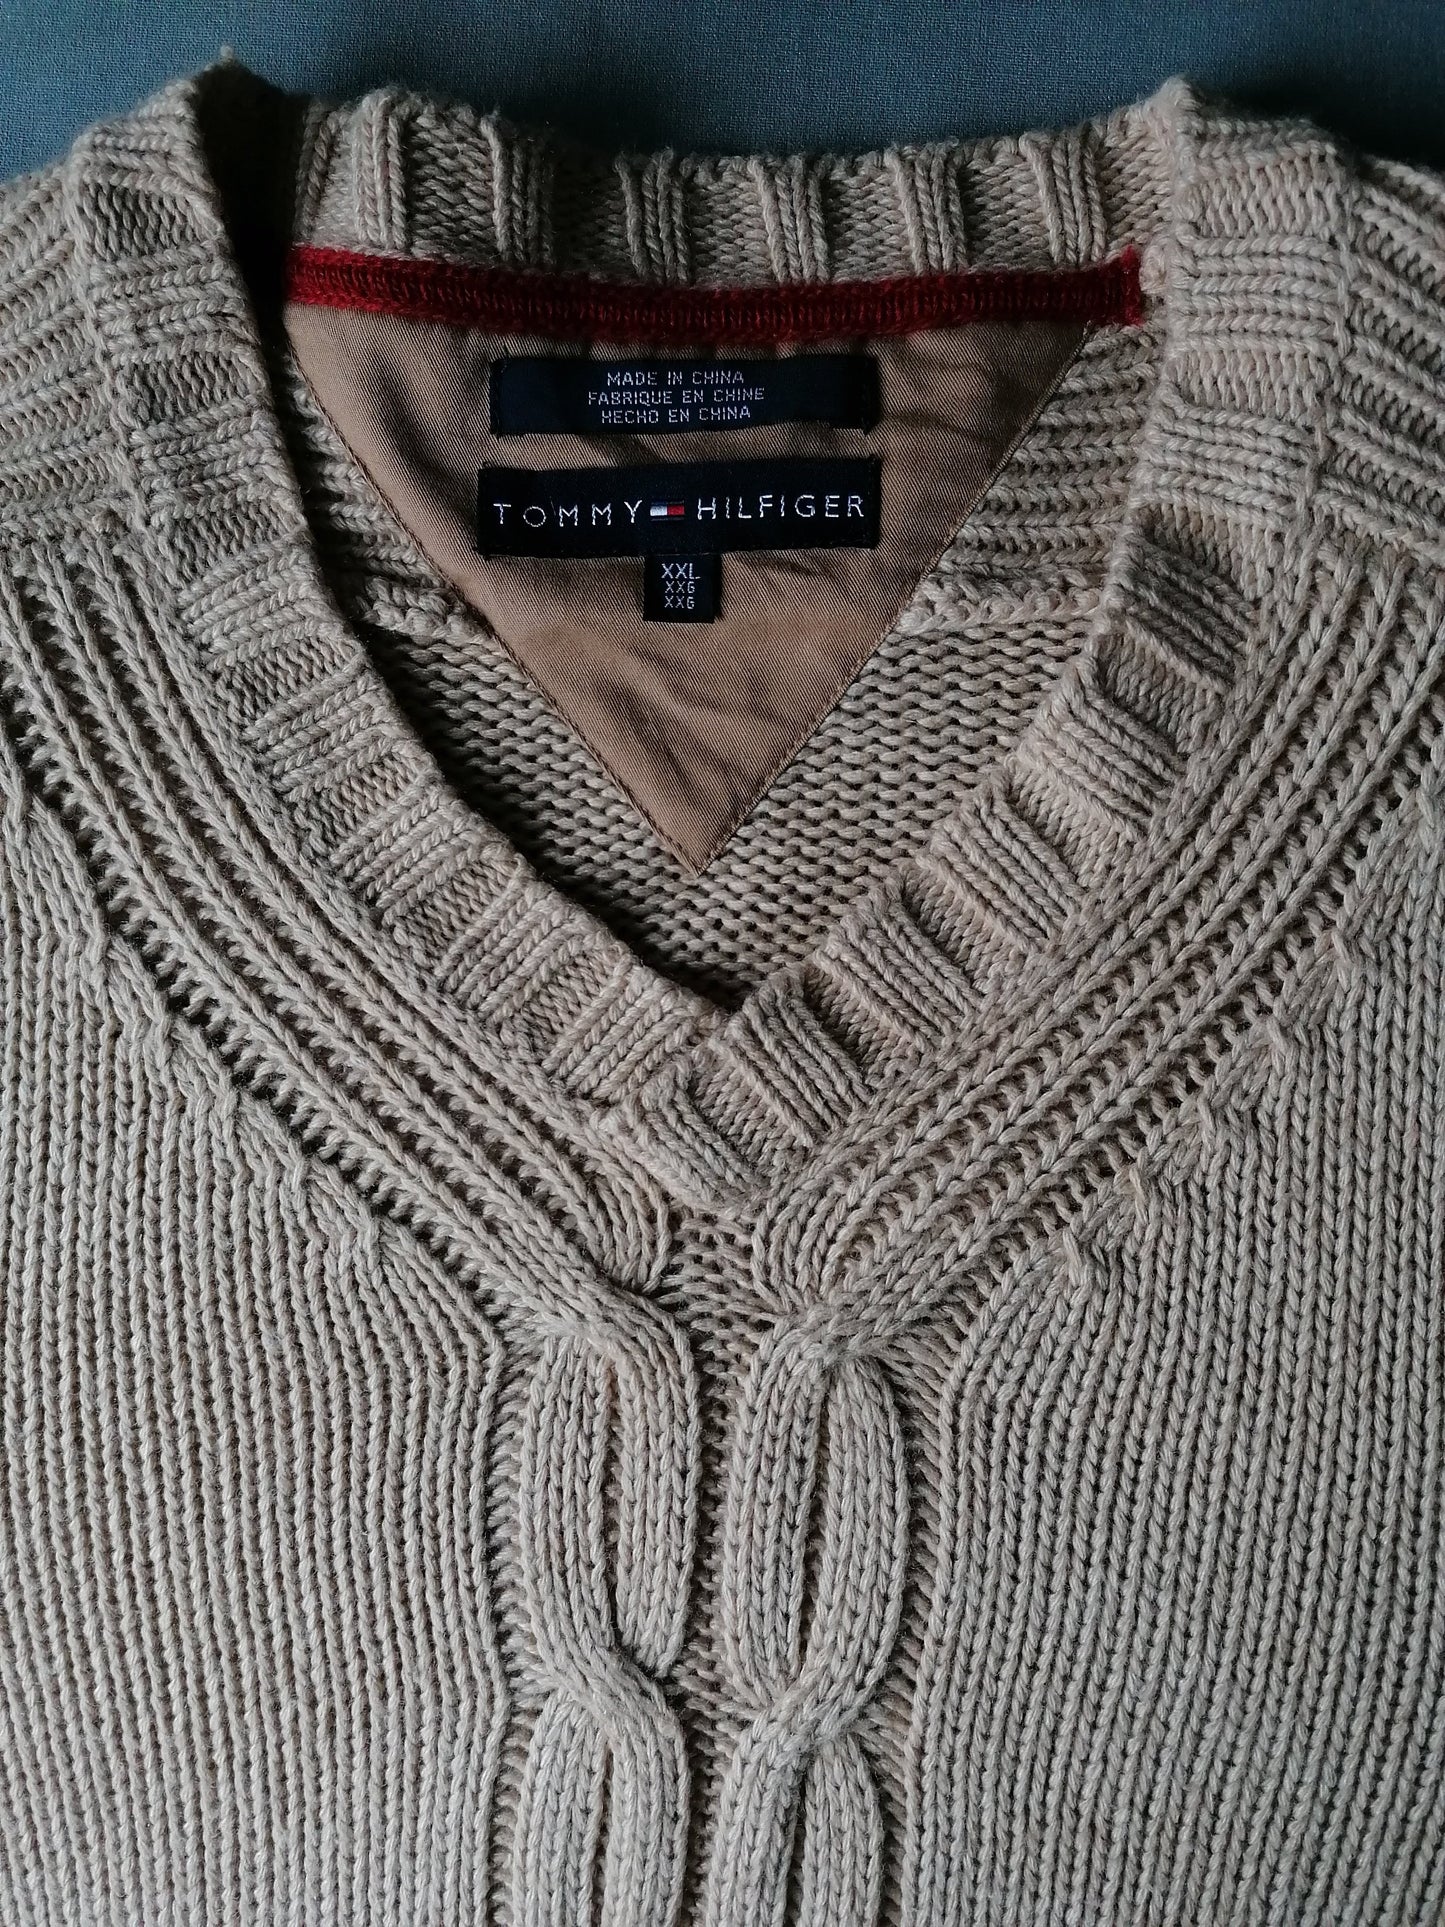 Tommy Hilfiger cable jersey with V-neck. Light brown colored. Size XXL / 2XL.